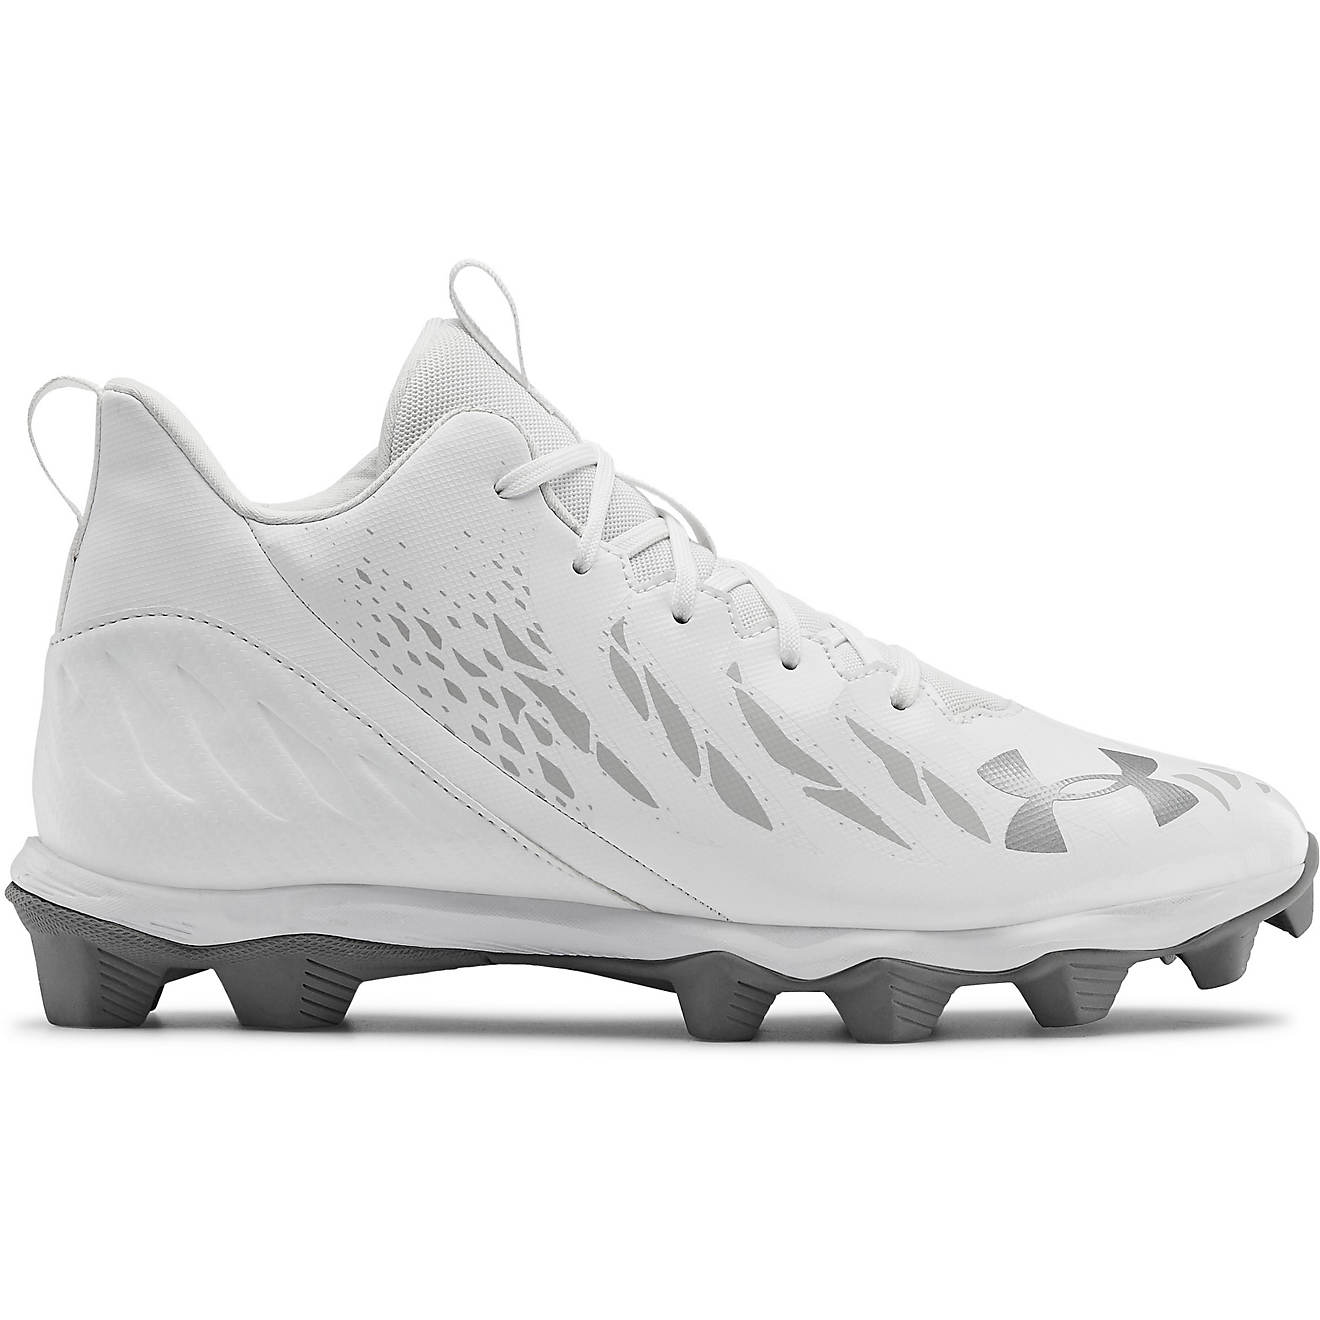 Under Armour Men's Spotlight Franchise Football Cleats                                                                           - view number 1